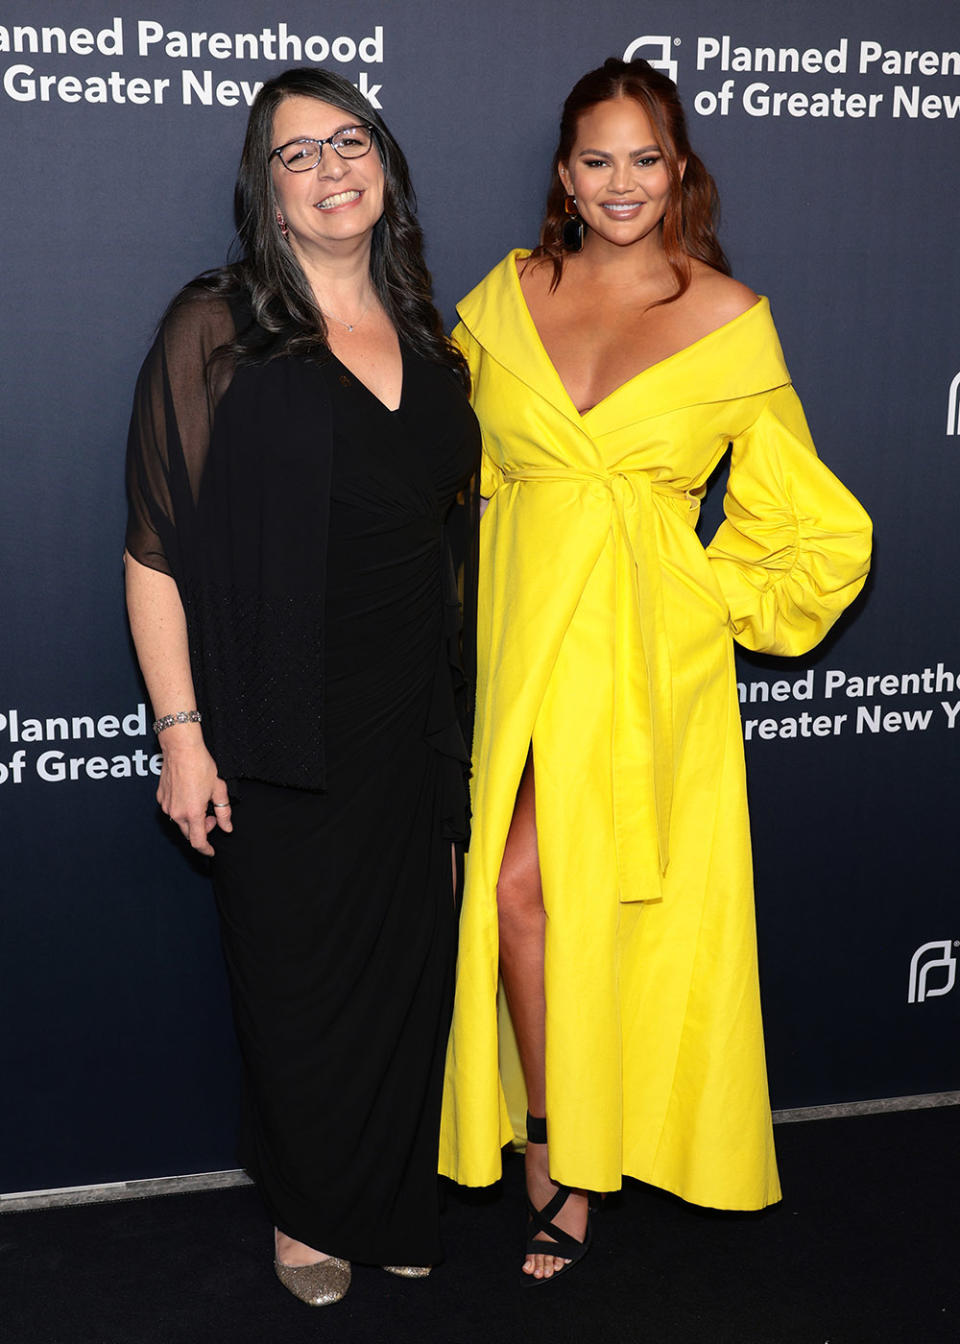 President & CEO of Planned Parenthood of Greater New York, Wendy Stark and Chrissy Teigen attend Planned Parenthood's New York Spring Benefit Gala at The Glasshouse on March 13, 2023 in New York City.